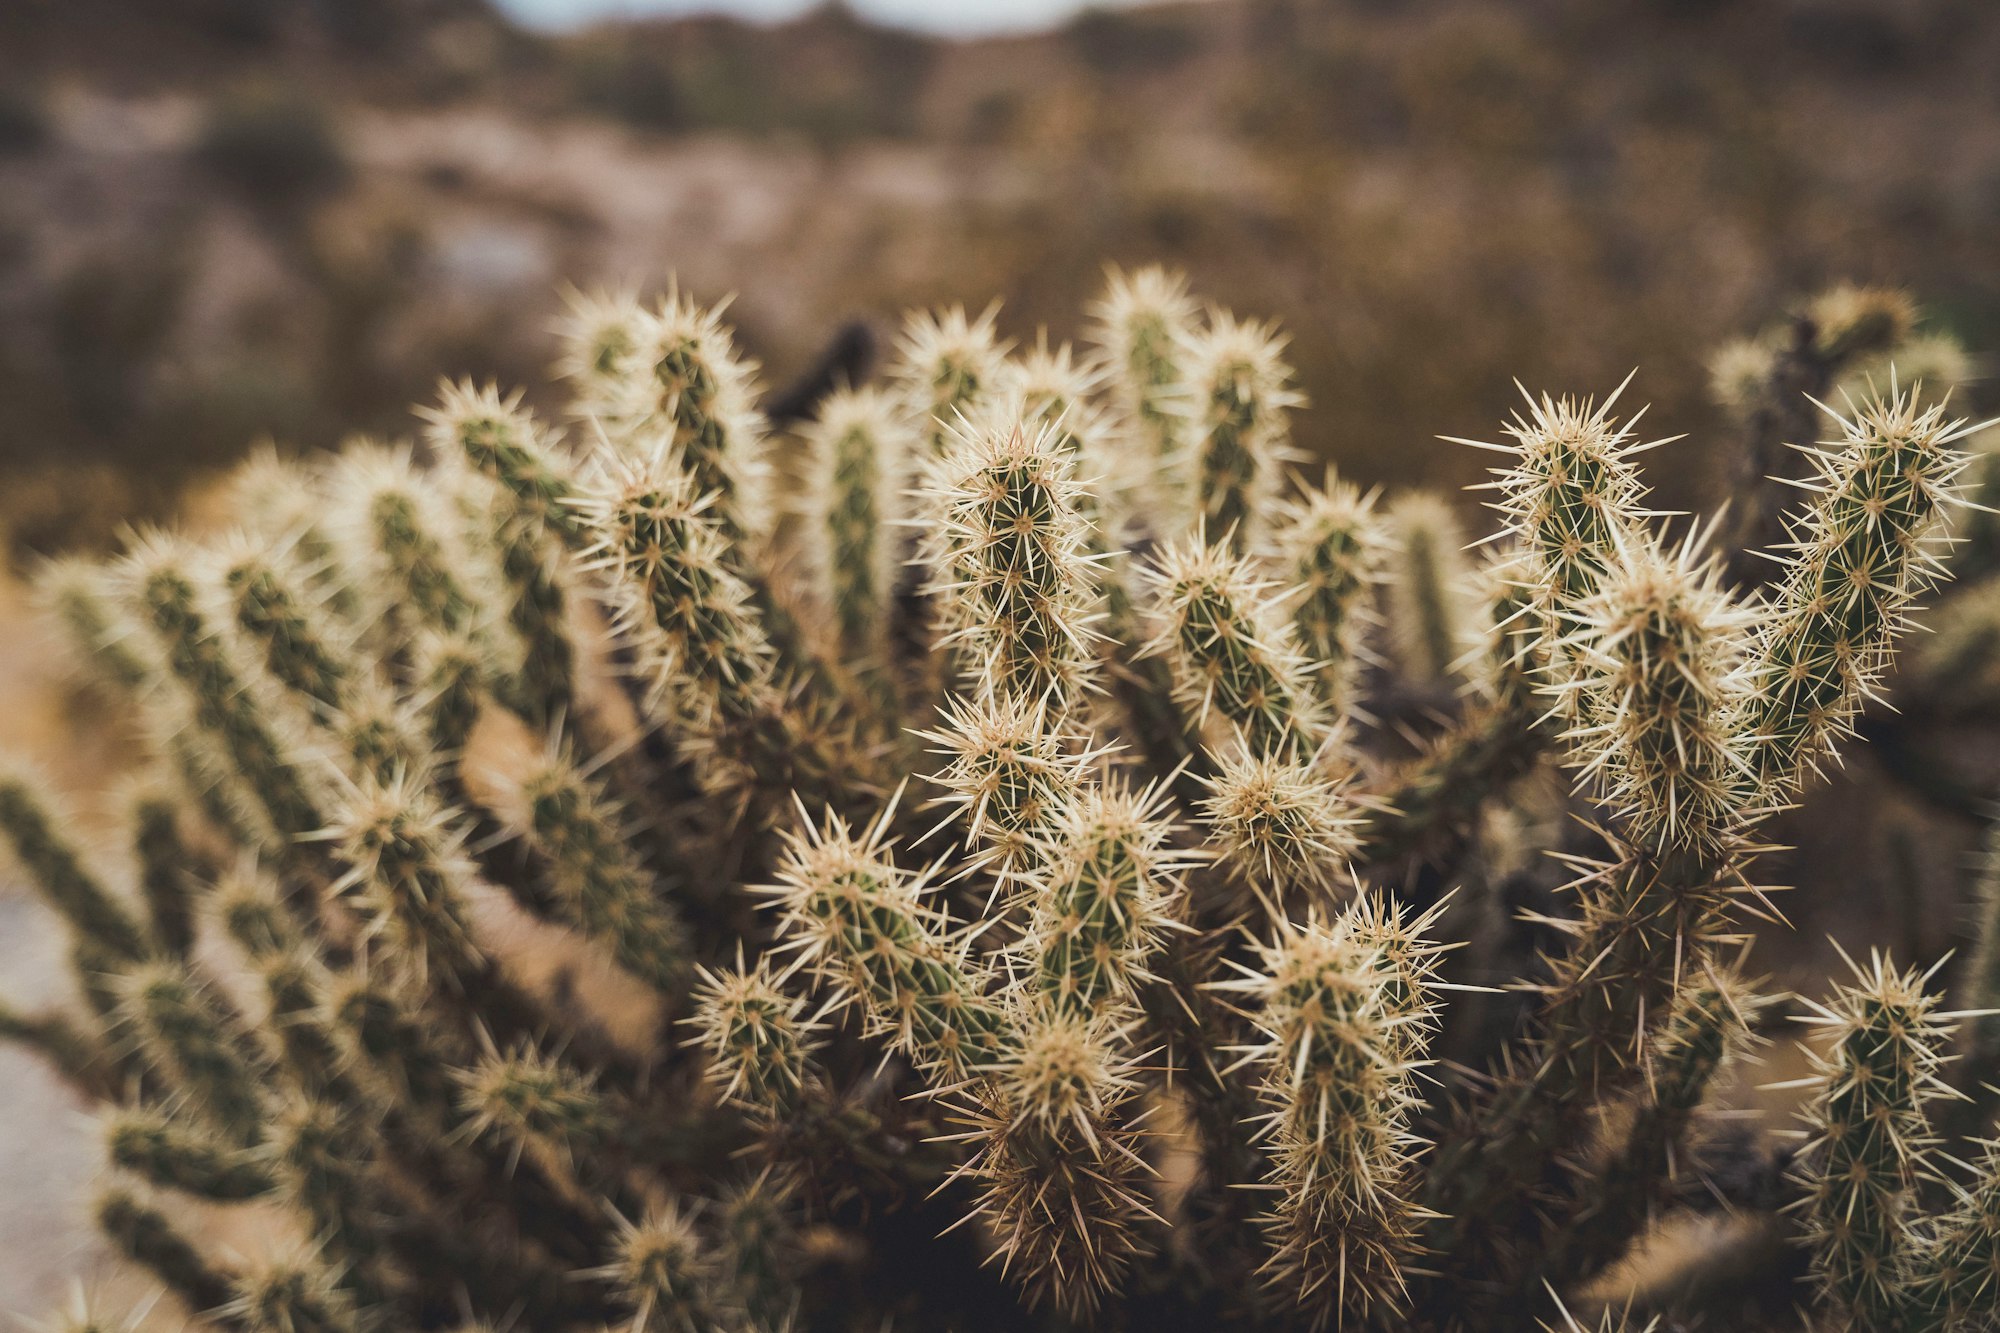 Cholla Cactus at South Mountain

If you find this picture useful, consider donating! Venmo: @diegonacho